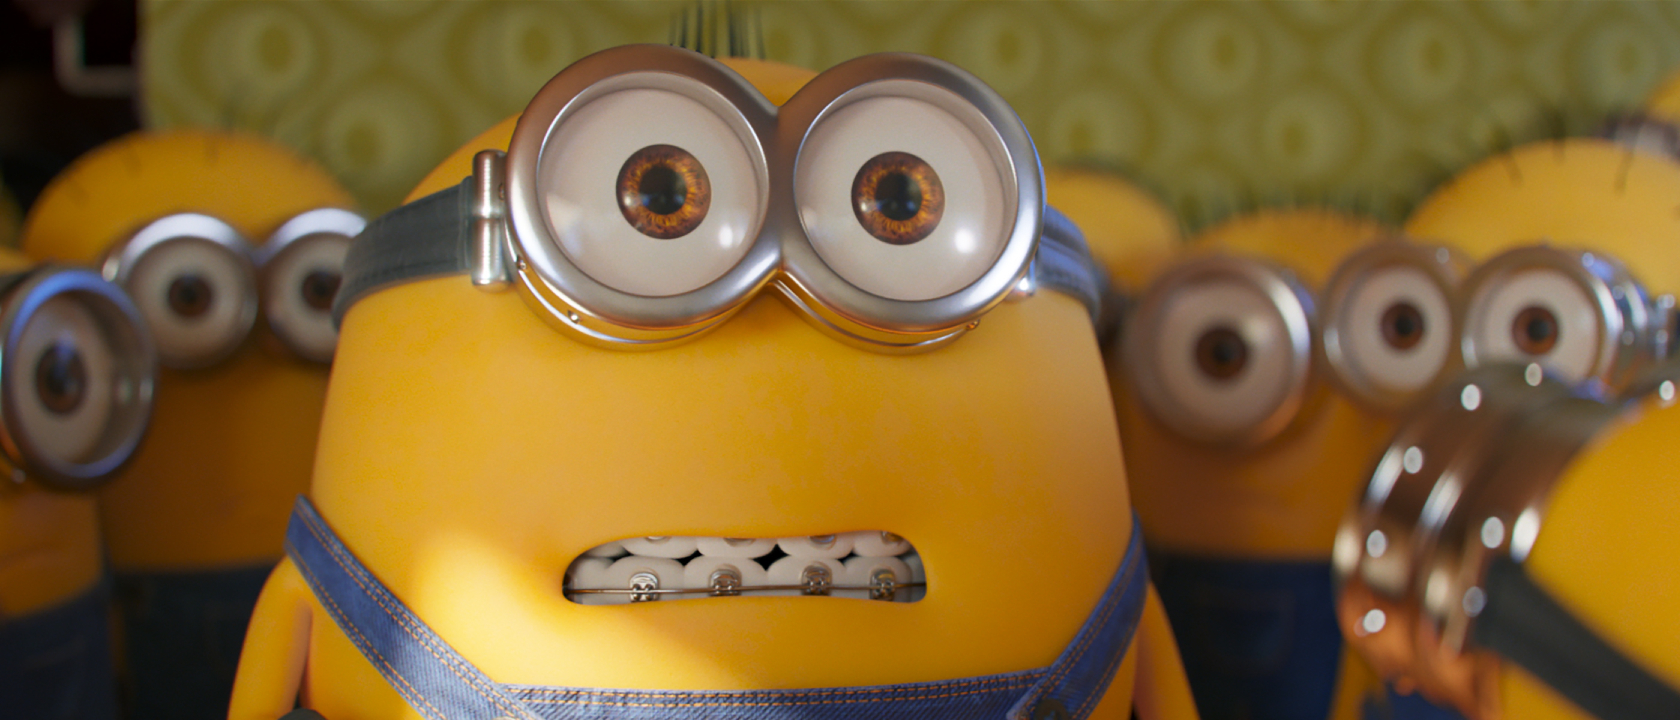 Banana-a-a-a-as!!!: Minions: The Rise of Gru and Mr. Malcolm's